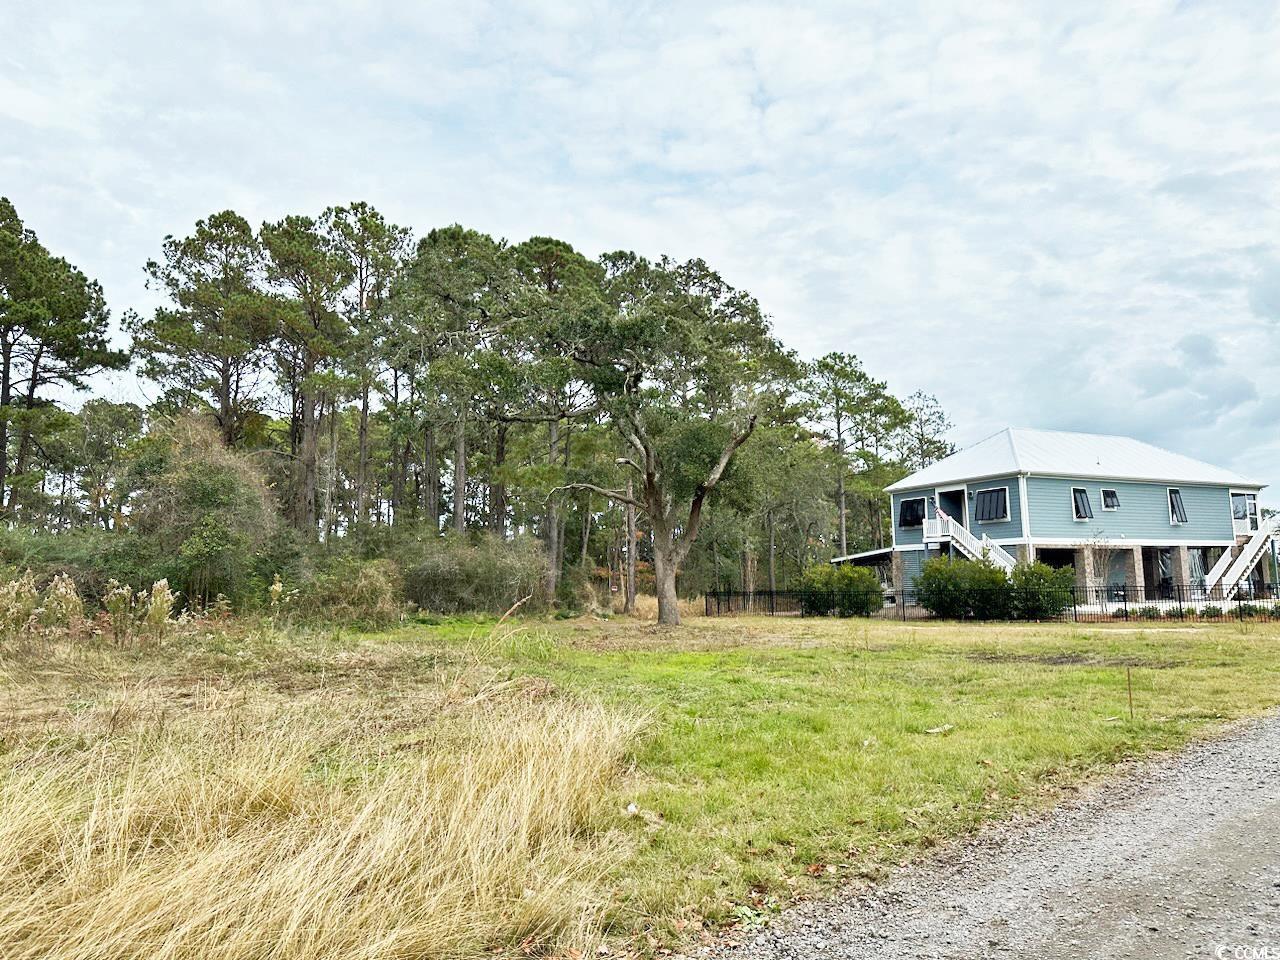 capture a piece of coastal living on this cleared lot! located on mainland pawleys island, this small niche creek front community provides an opportunity to get on island time, starting with no hoa. constructing a two-story raised beach house on this lot could capture refreshing sea breezes as well as a spectacular ever-changing, dawn-to-dusk inlet view. the adjacent estuary provides a private natural backdrop providing hours of birding right at your doorstep. public water and sewer are accessible from the road. seller has two plans available; both could provide a great view. plan i: 2740 sq ft, 2 levels, 4 br/3.5 ba. plan ii: 1700 sq ft, 1 level, 3 br/2 ba. this property is centrally located to the beaches, golf courses, shops and dining. plus close proximity to highway 17 but a world away!